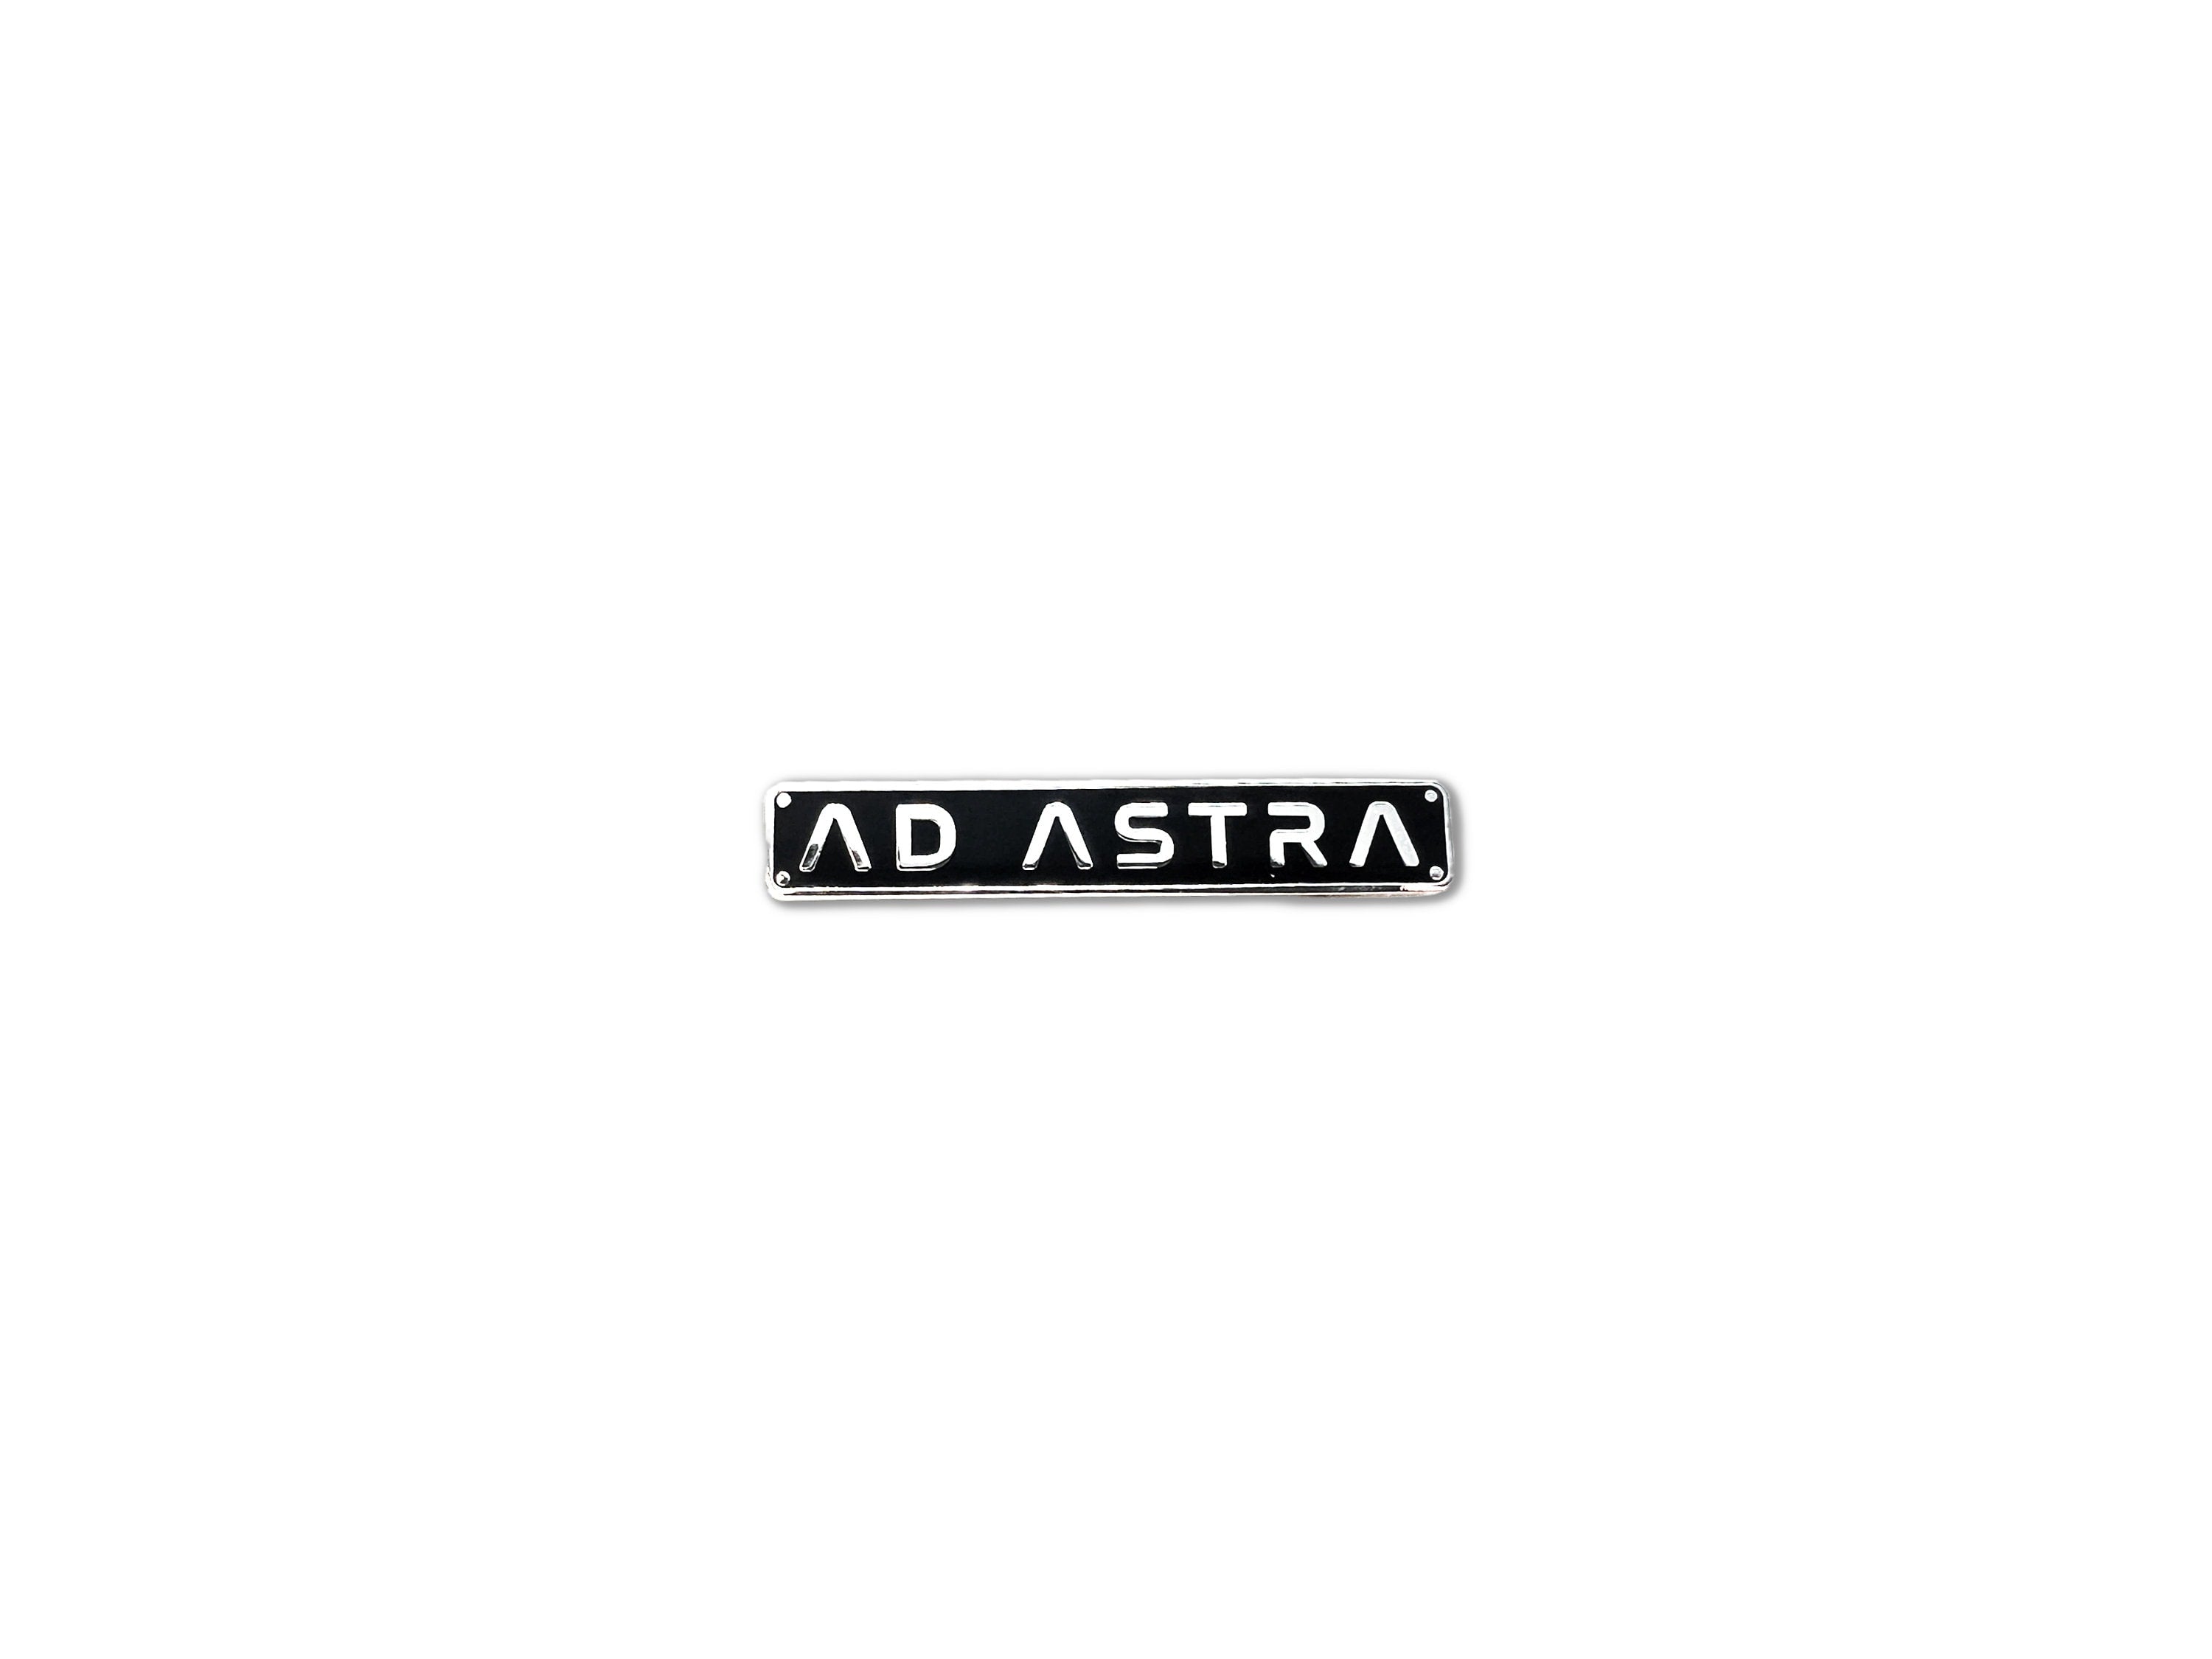 Ad Astra Enamel Pin - To The Stars Lapel Pin- Space & Astronomy Lovers Gift